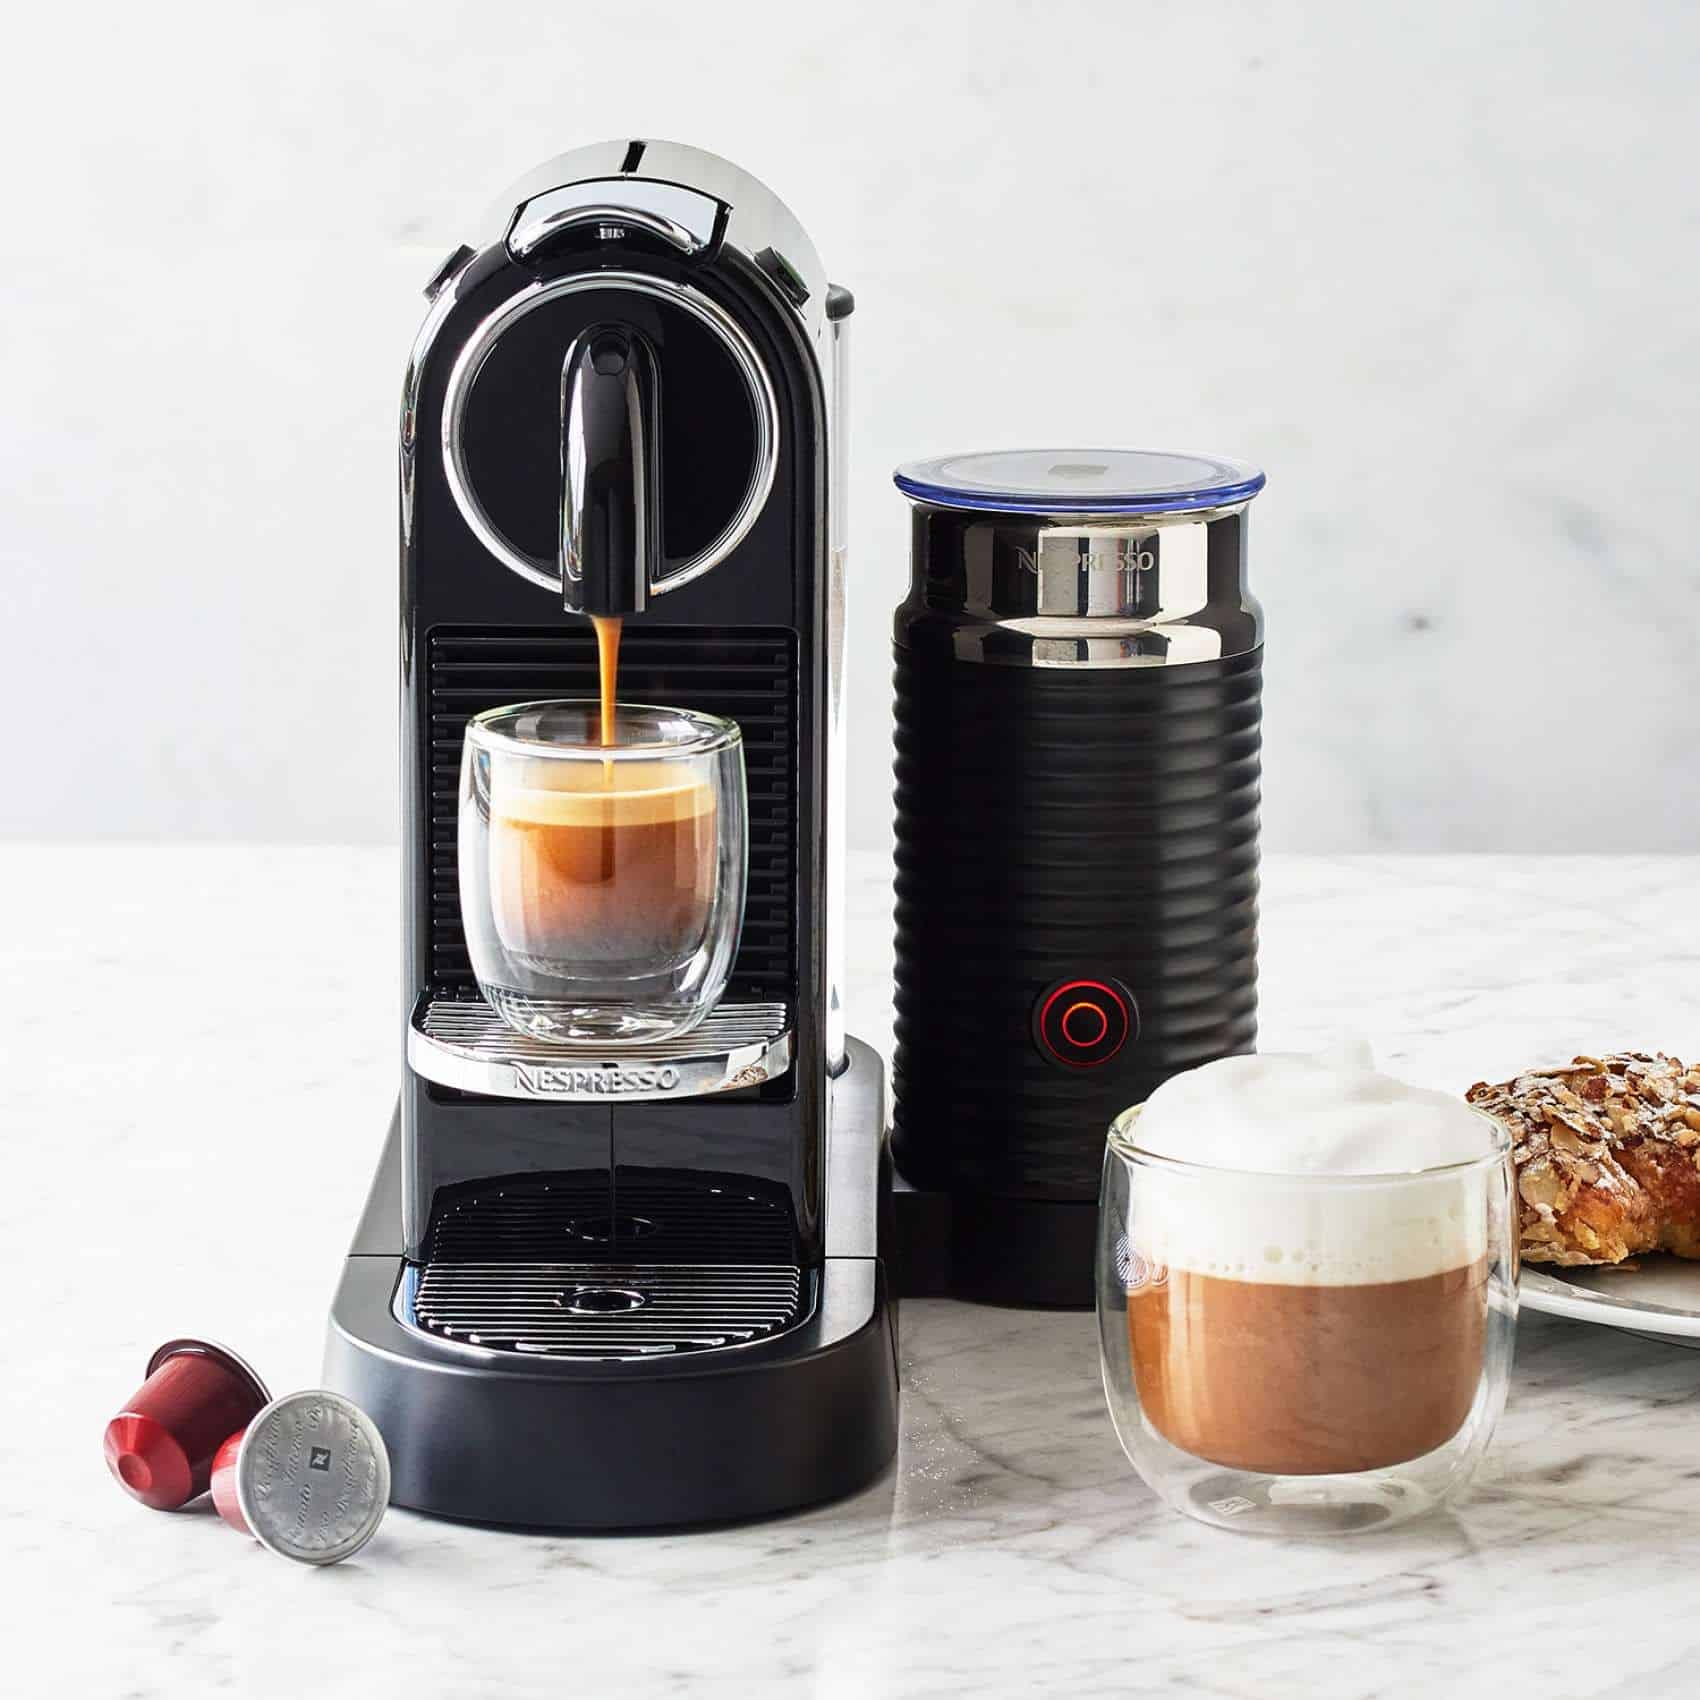 How To Use Nespresso Machine With Milk Frother